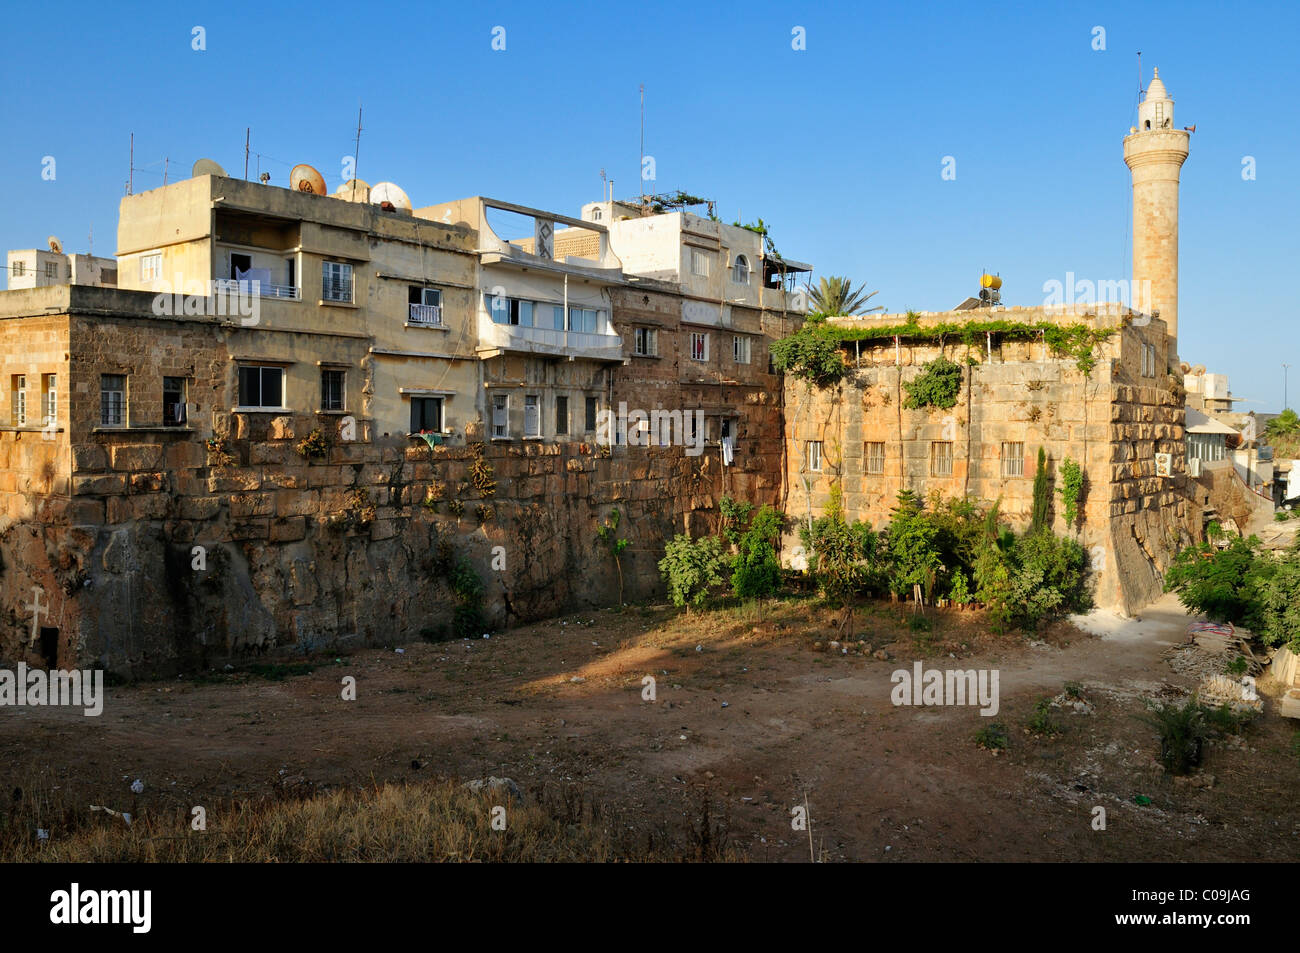 Historic town of the Crusader City of Tartus, Tartous, built on the antique citadel, Syria, Middle East, West Asia Stock Photo